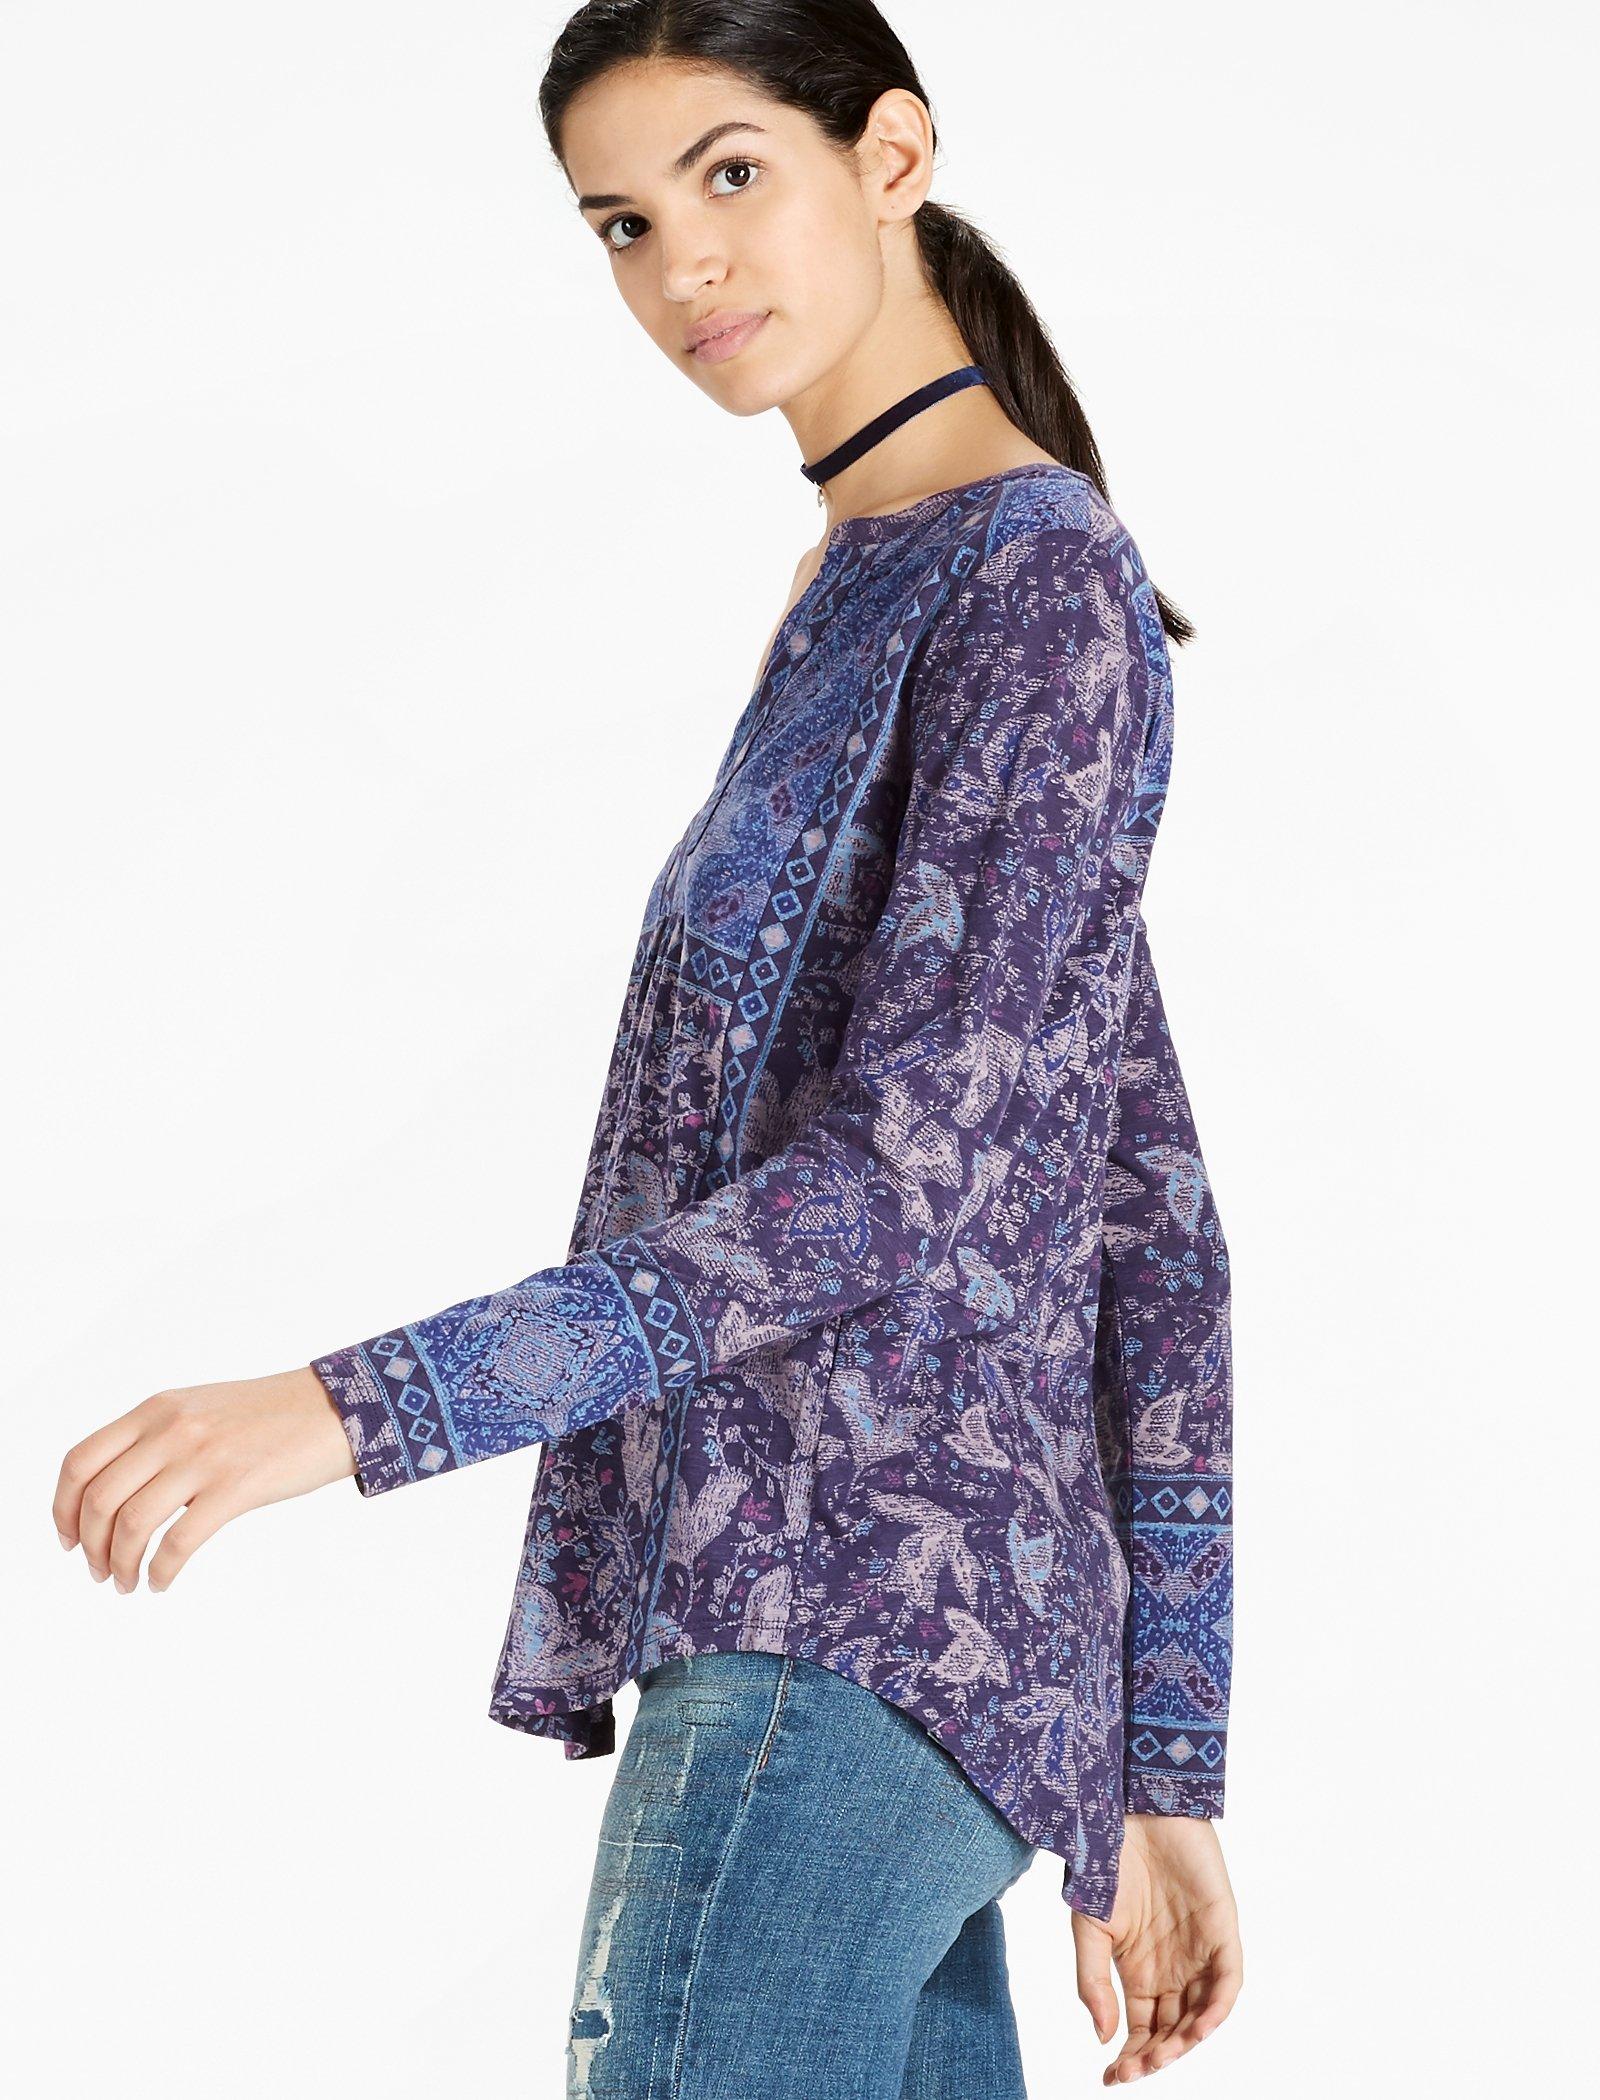 PLACED PRINT TOP | Lucky Brand